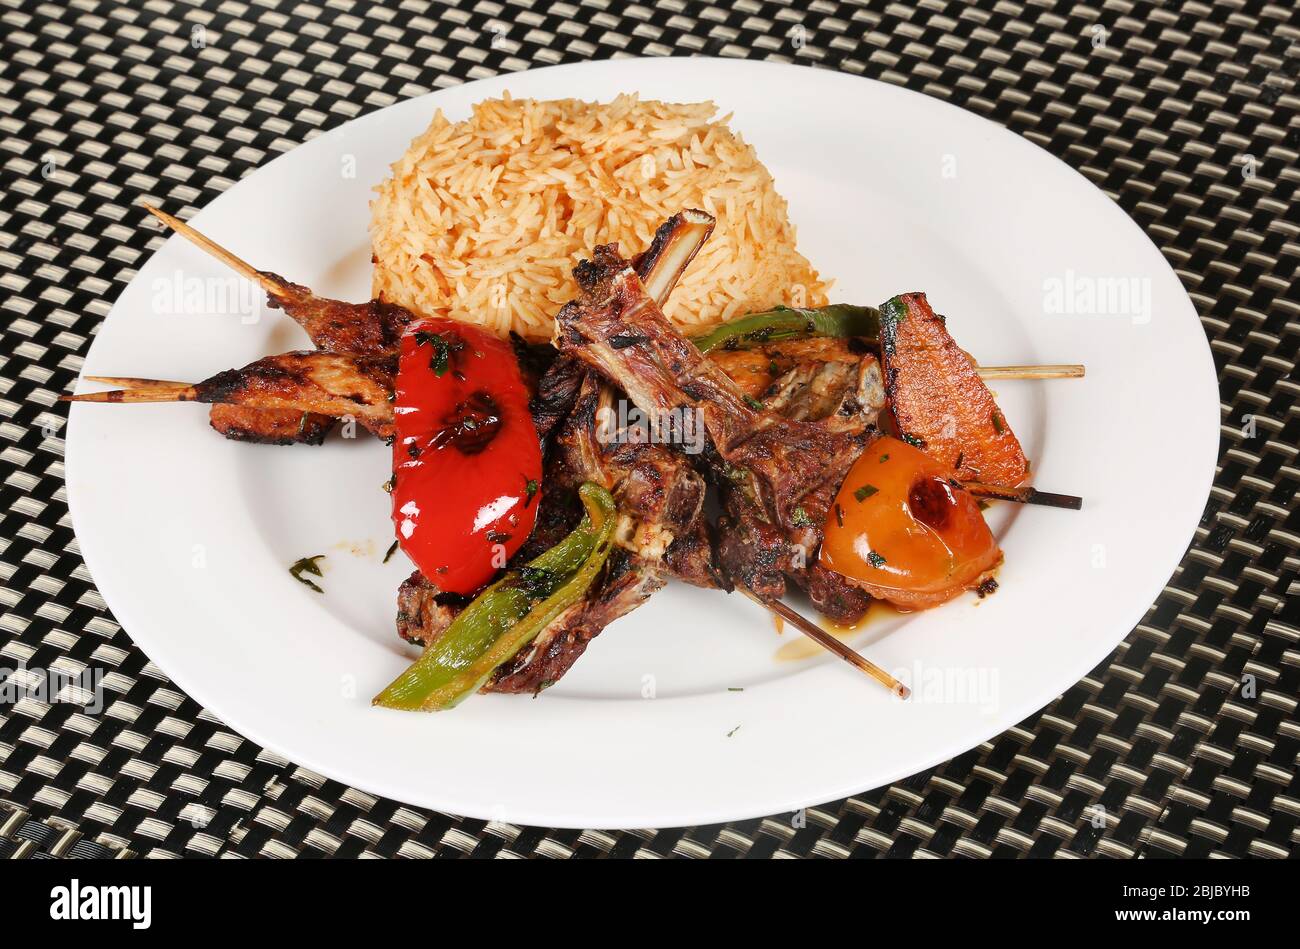 Non veg Meal | Grilled Mutton Chaps, Kebab, Grilled Tomato and Capsicum served with Rice Stock Photo